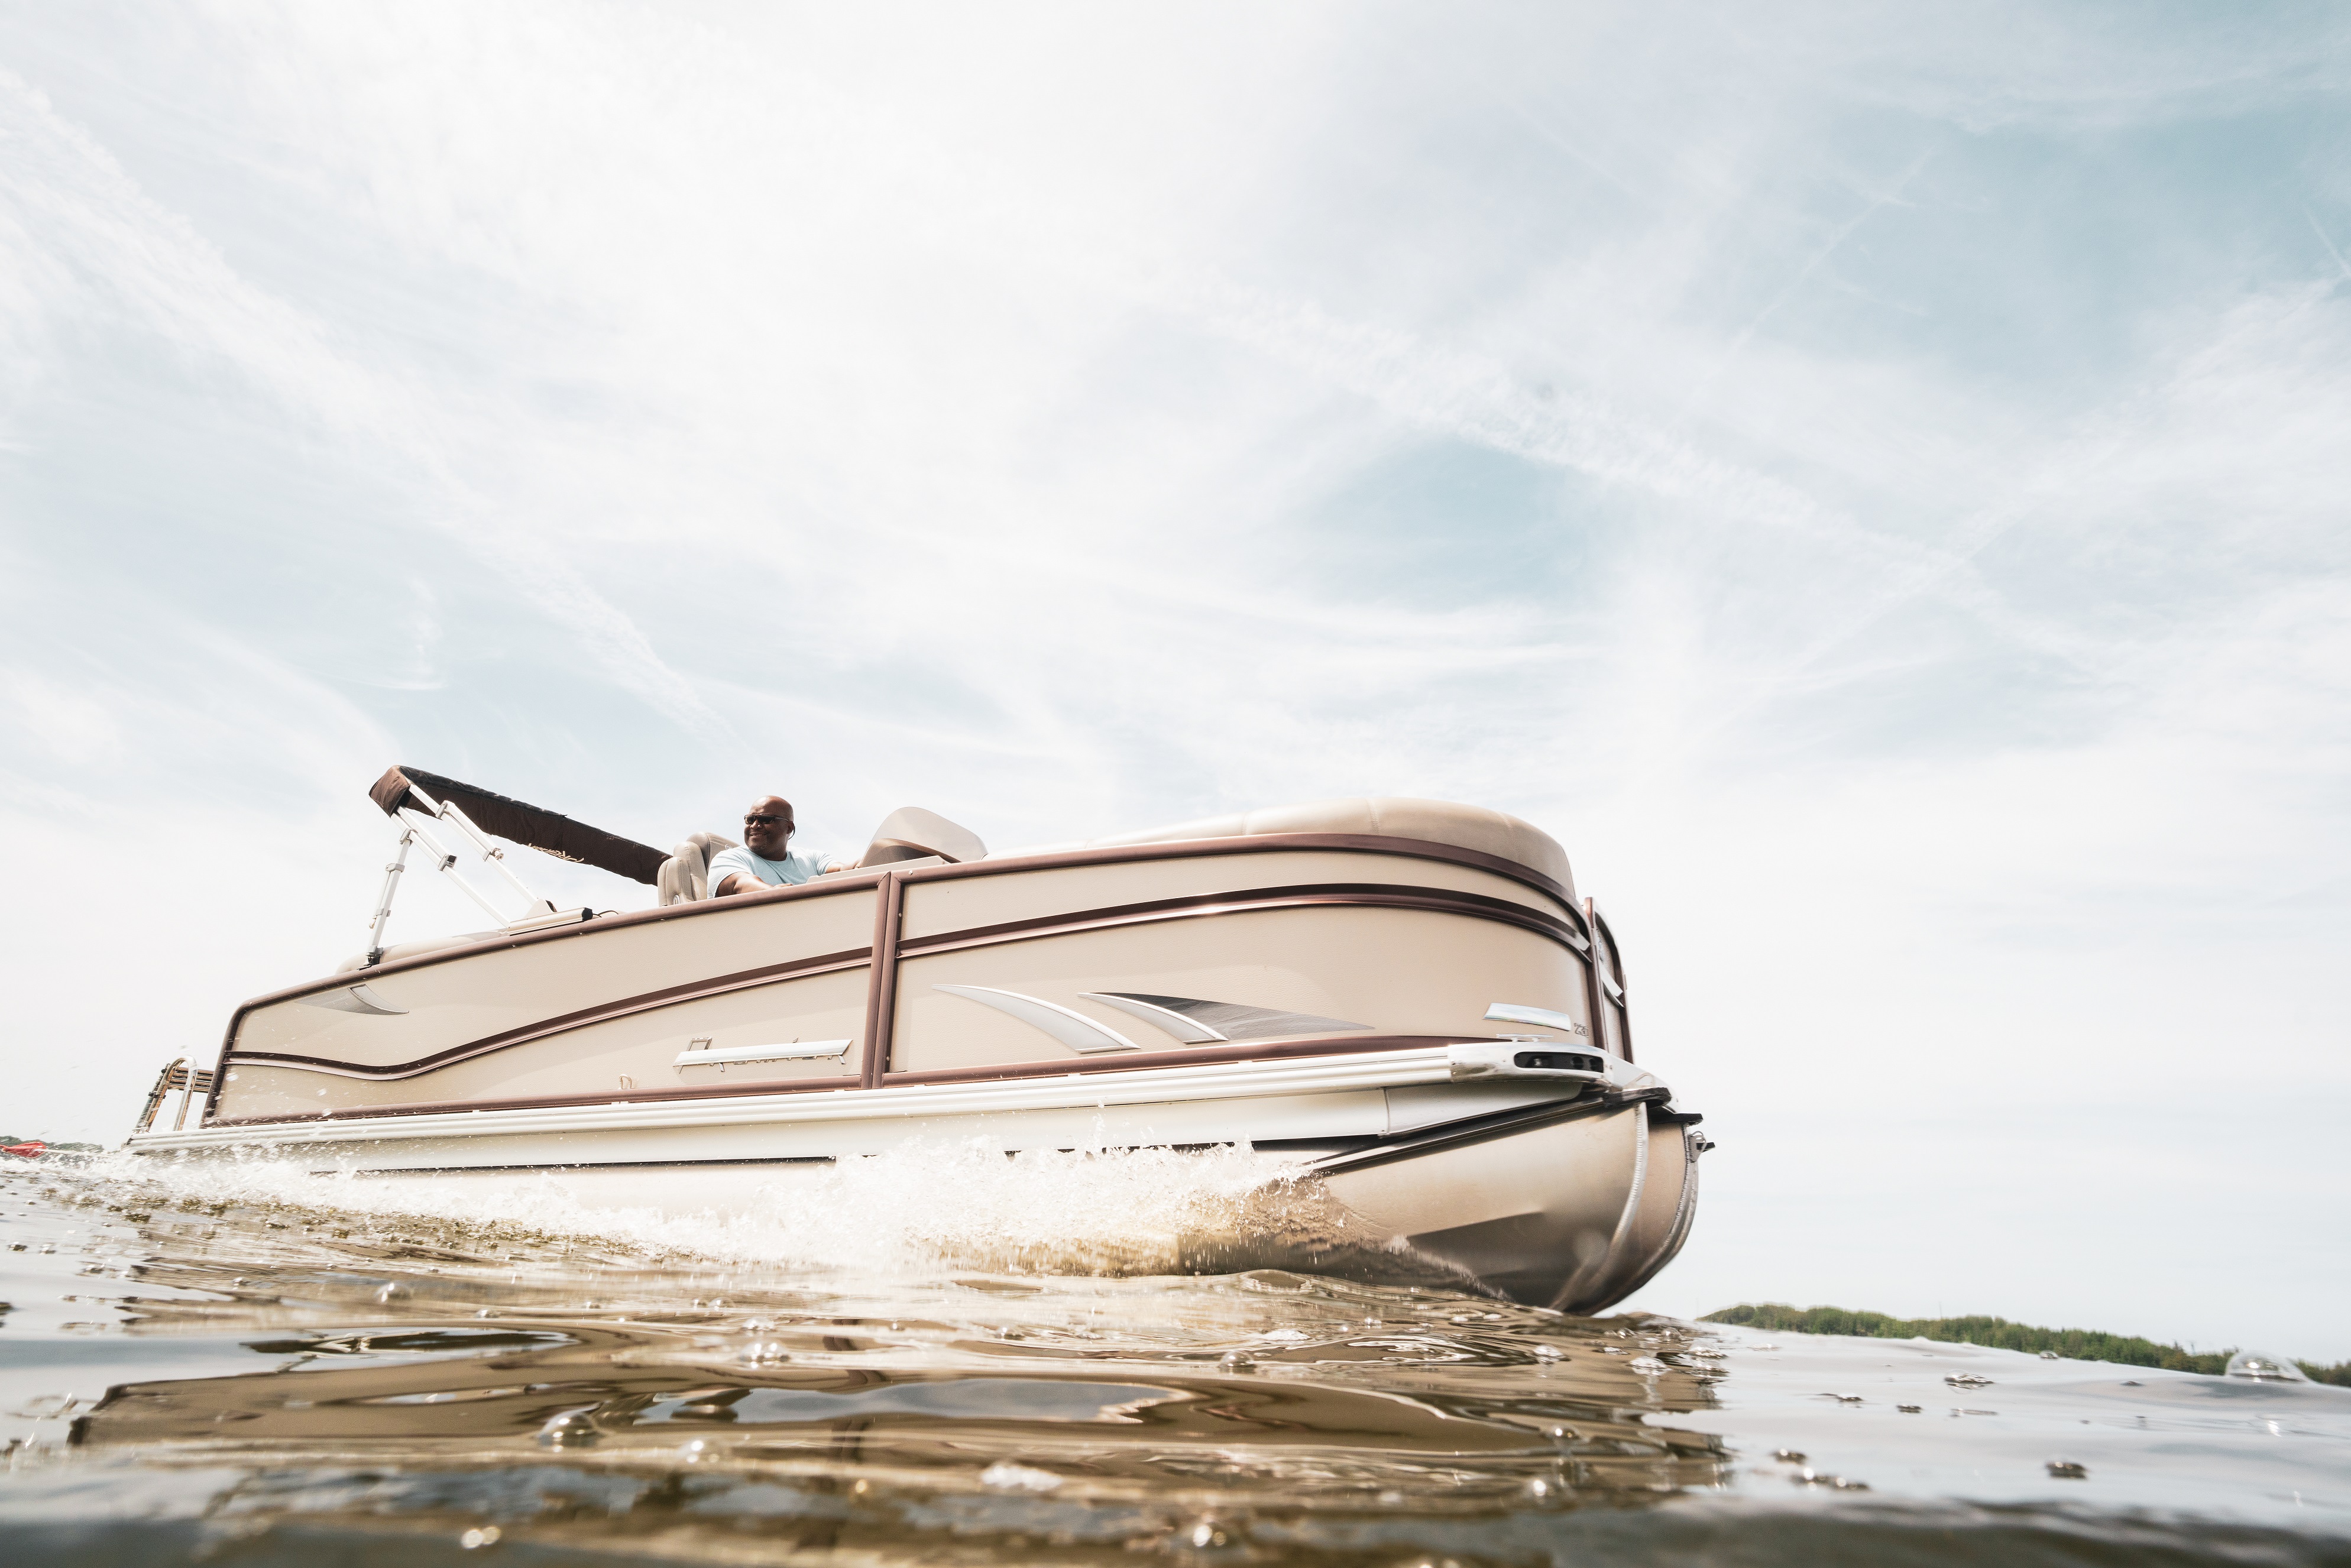 Report: Recreational Boating Boom Continues as Americans Turn to